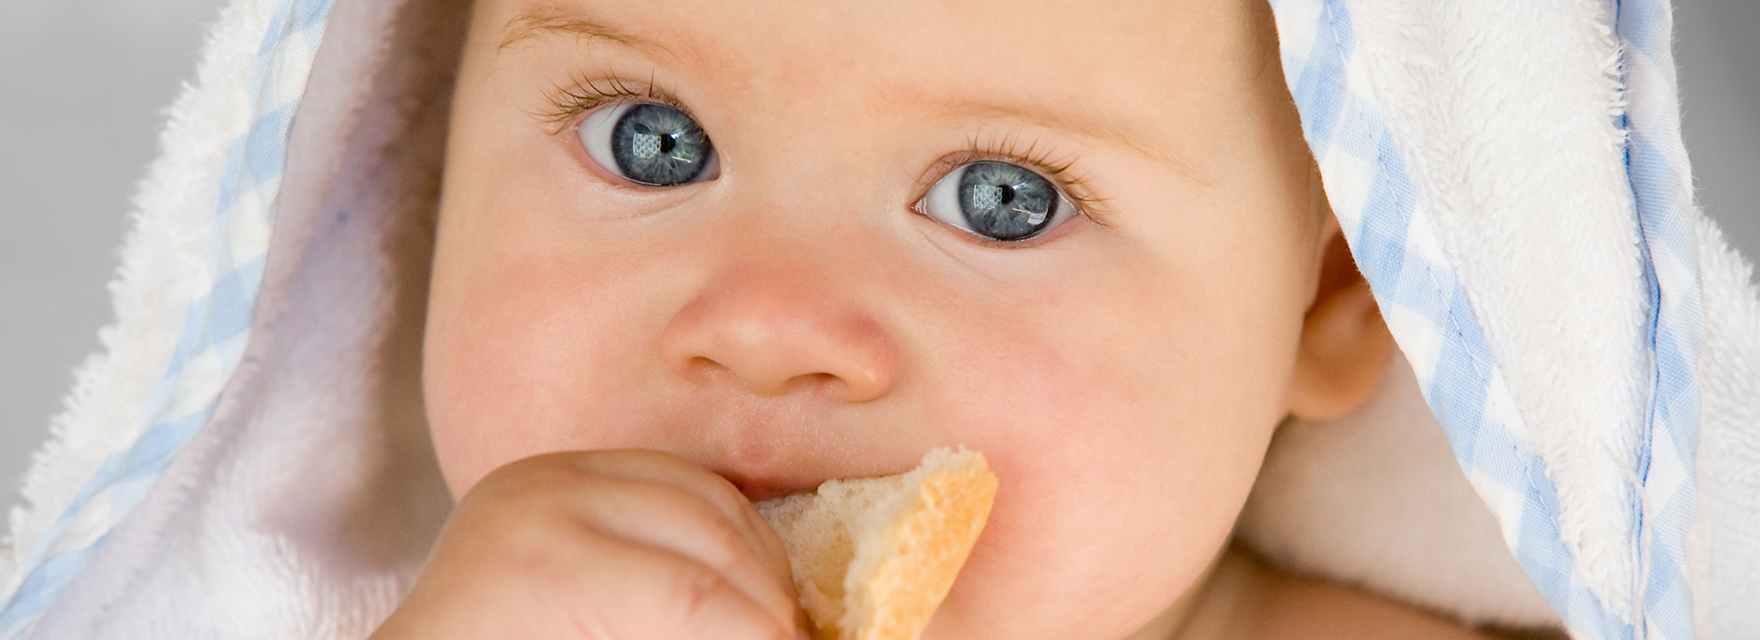 Healthy topping for your baby’s first piece of bread